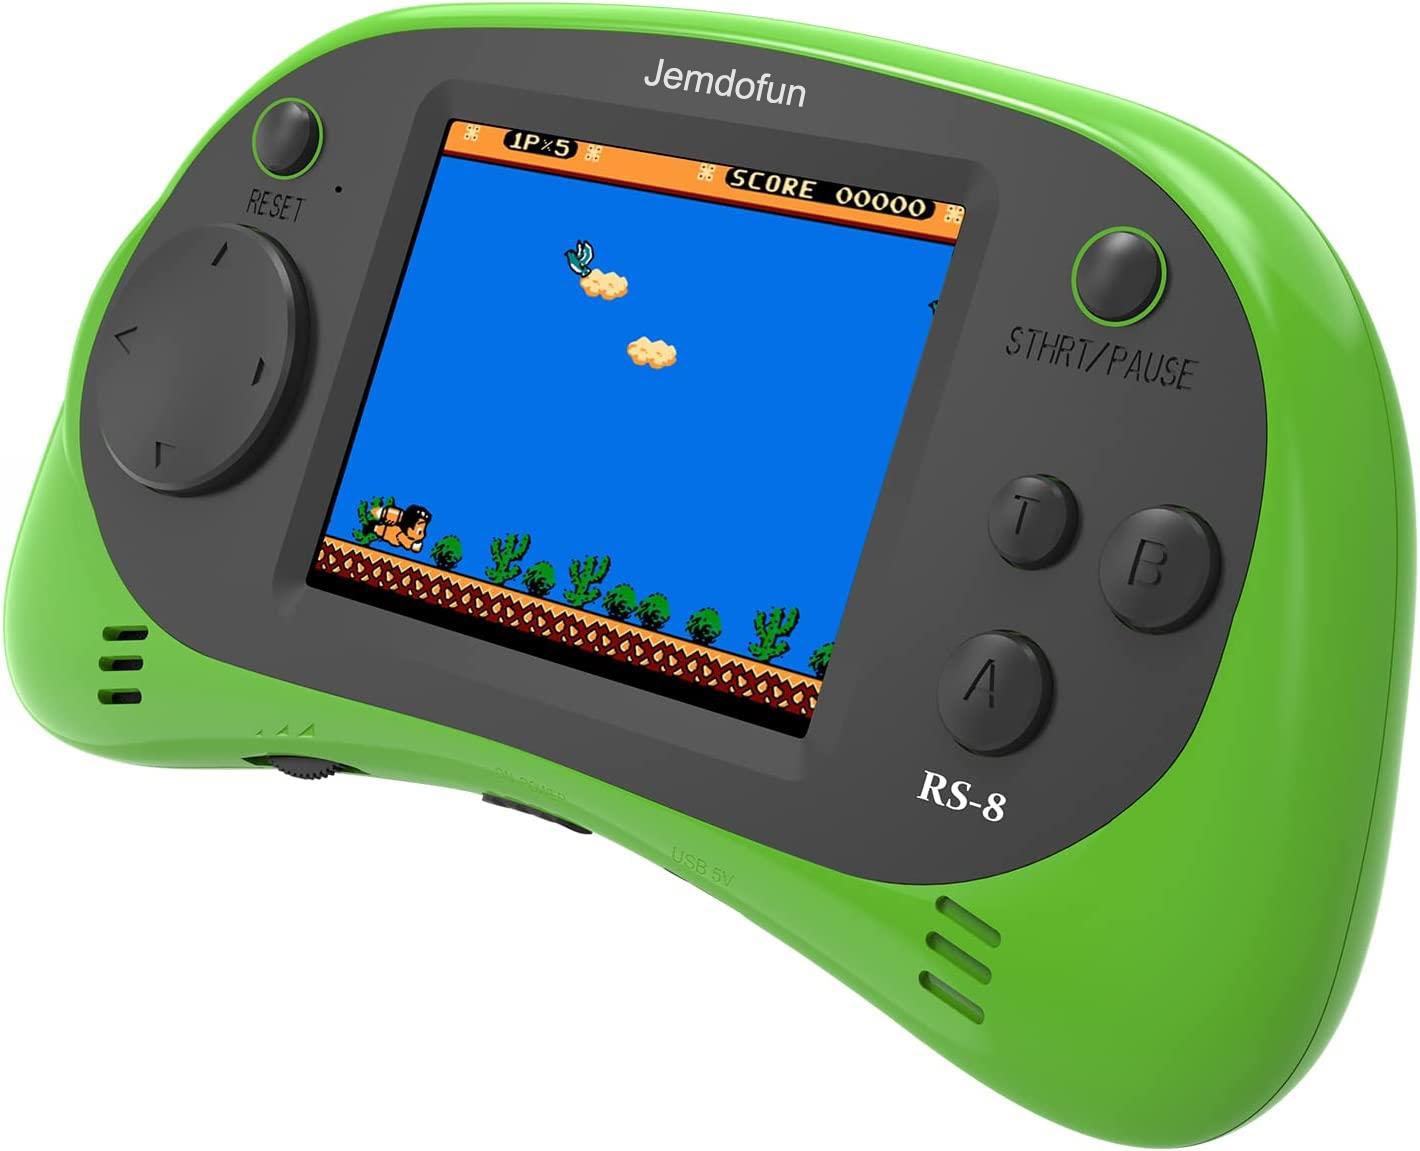 Jemdofun Kids Handheld Games 8 Bit Retro Games Console with 260 Games 2.5 Inch Screen Portable Video Games Player Support AV Output, Electronic Games Gift for Boys Girls Age 4-12 Years 